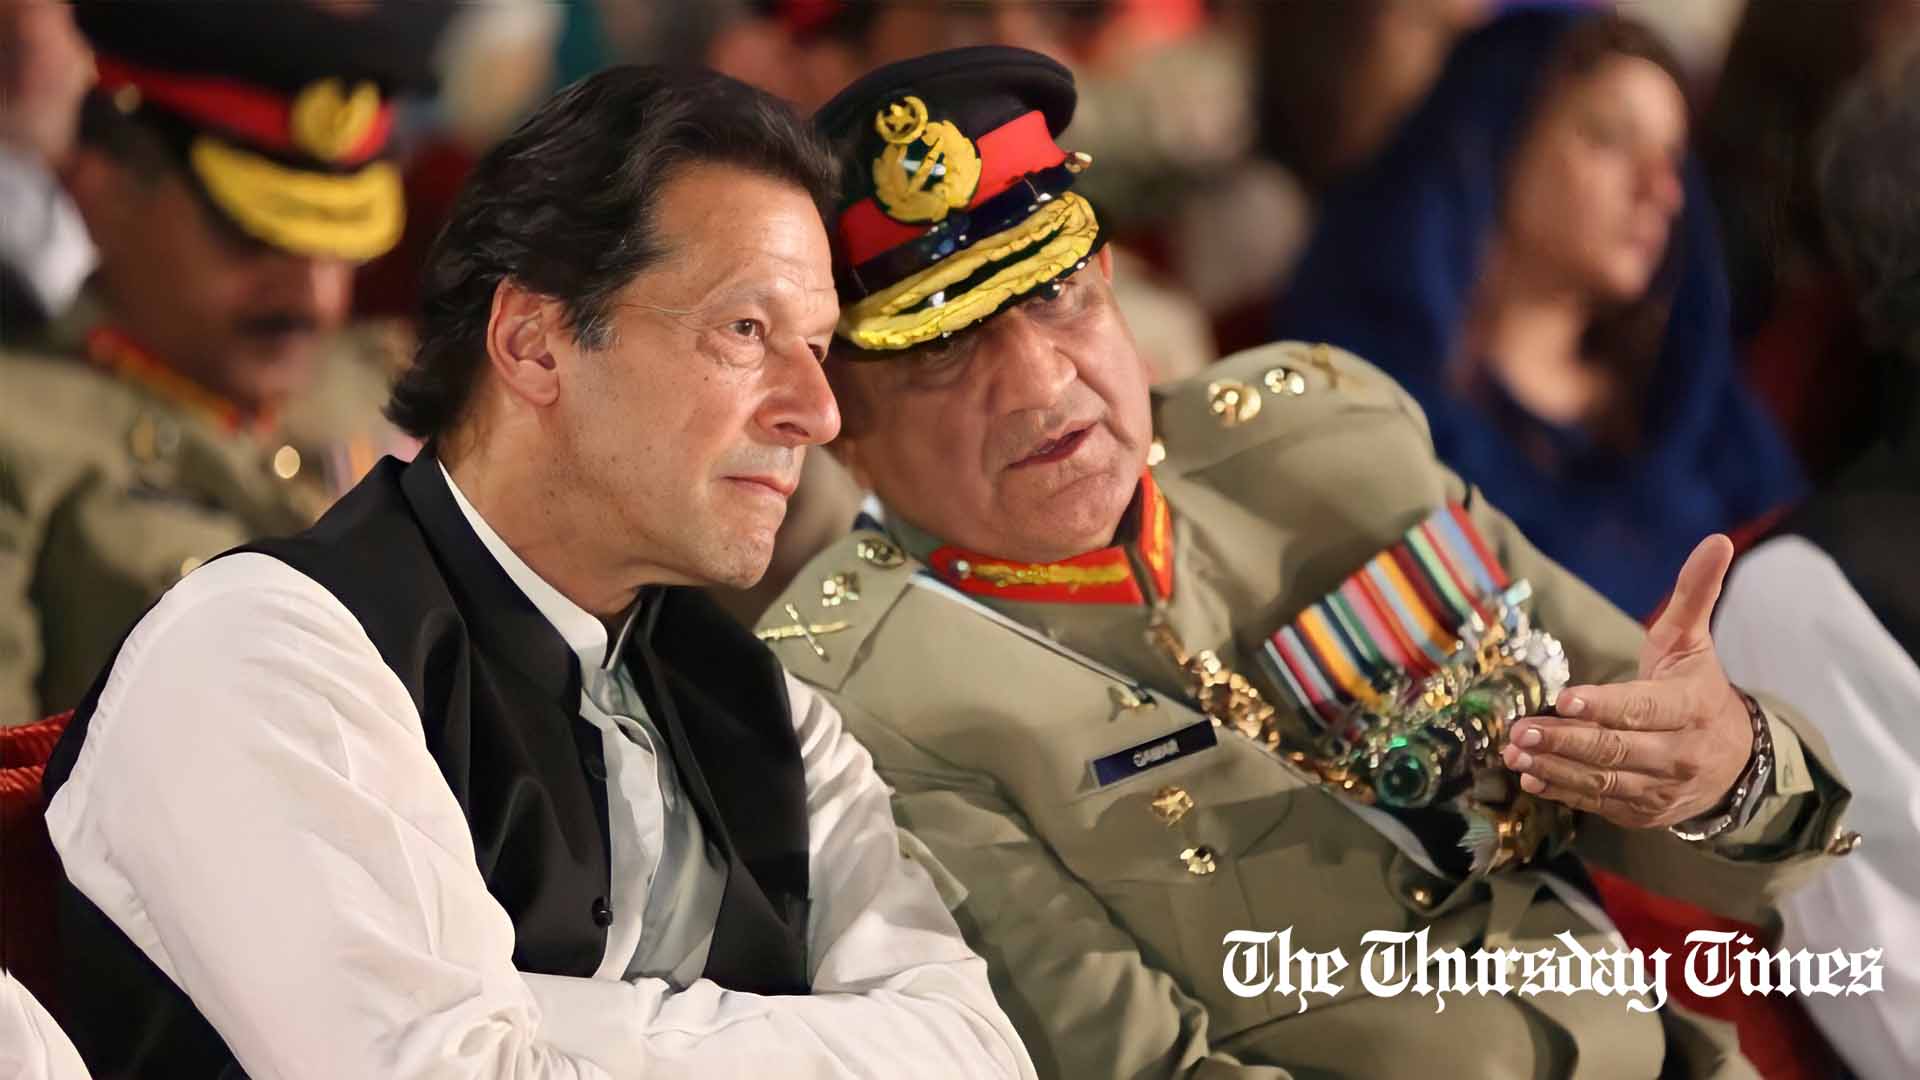 A file photo is shown of PTI chairman Imran Khan with former COAS Qamar Javed Bajwa in 2022.